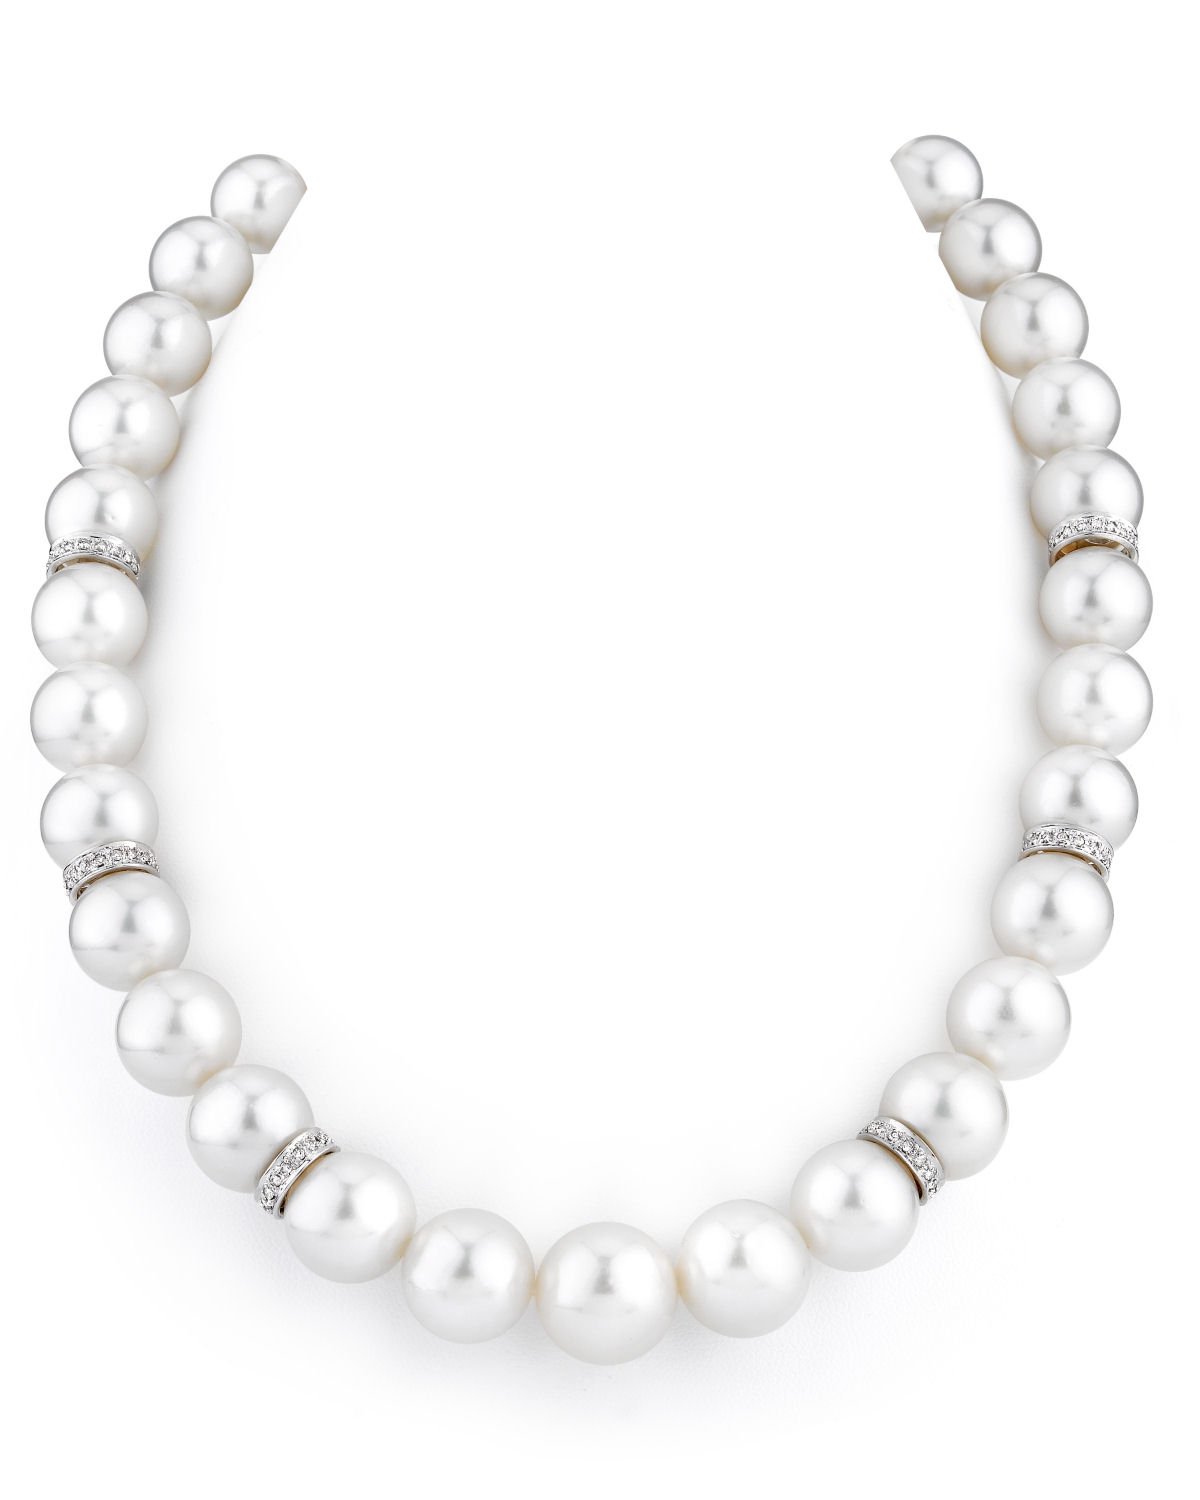 11-14mm South Sea Pearl Necklace with Diamond Rondelles